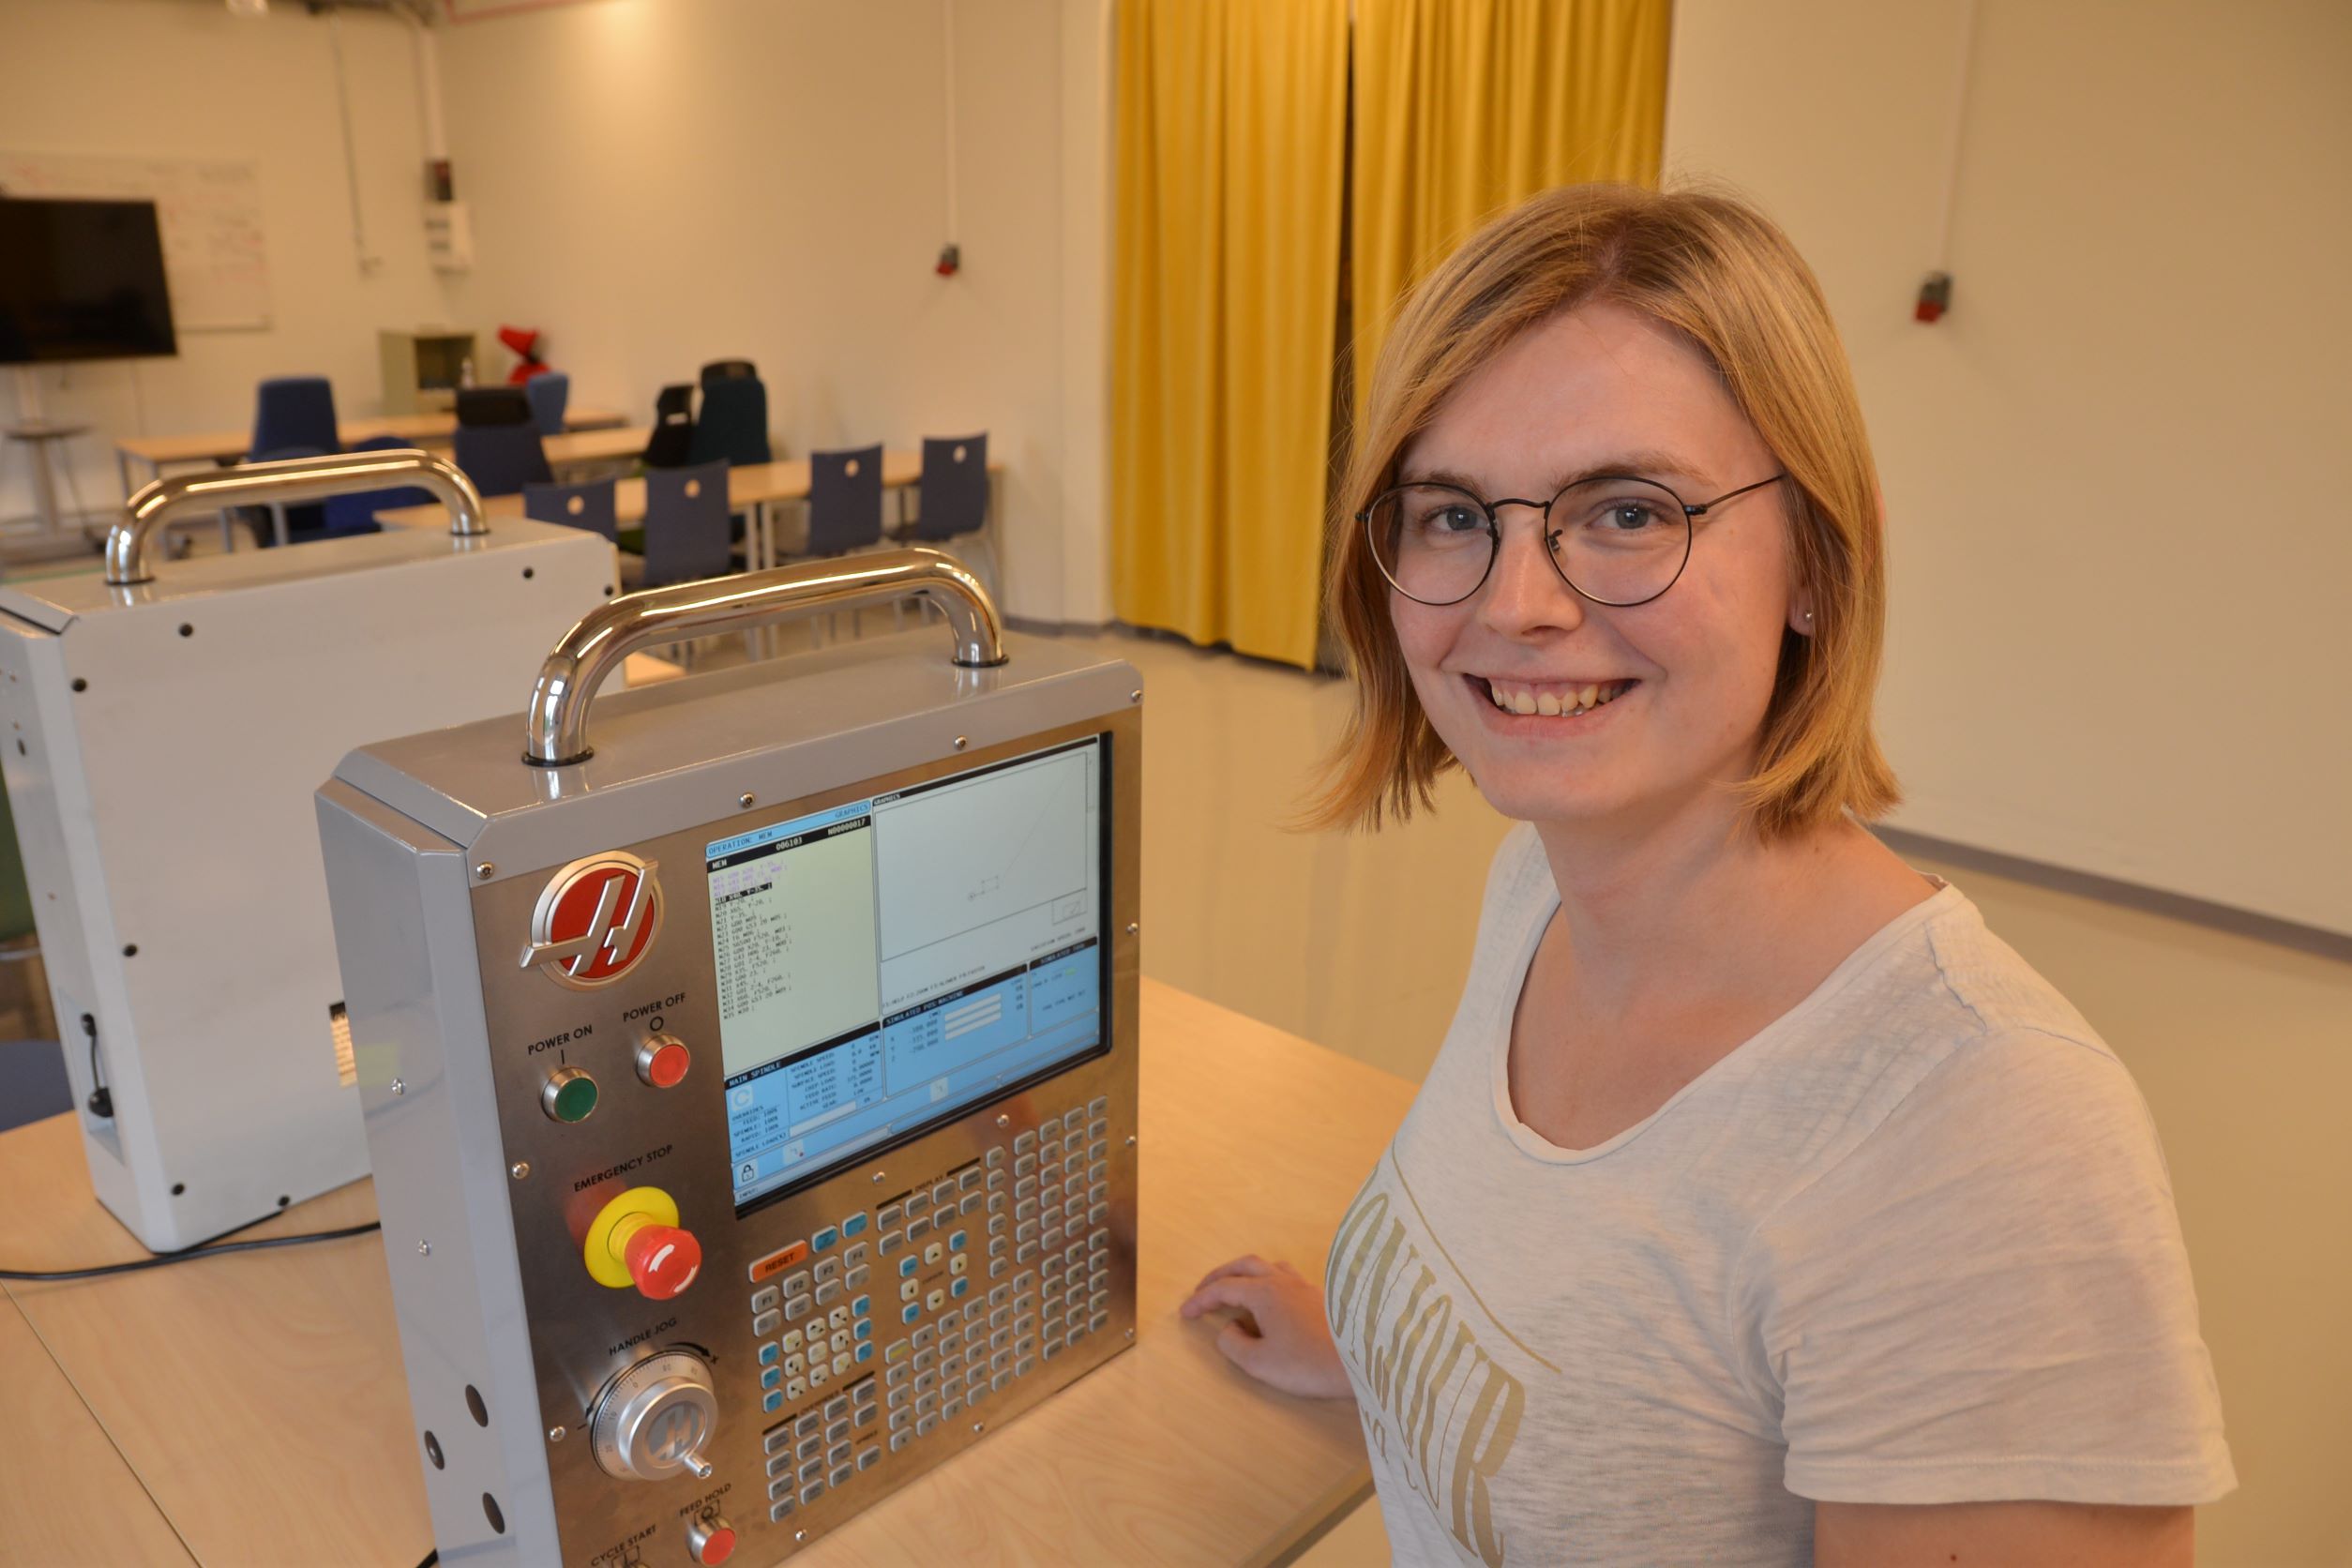 Tove Rosén is studying to be a CNC technician at YJ and moved to Jönköping because of her education.